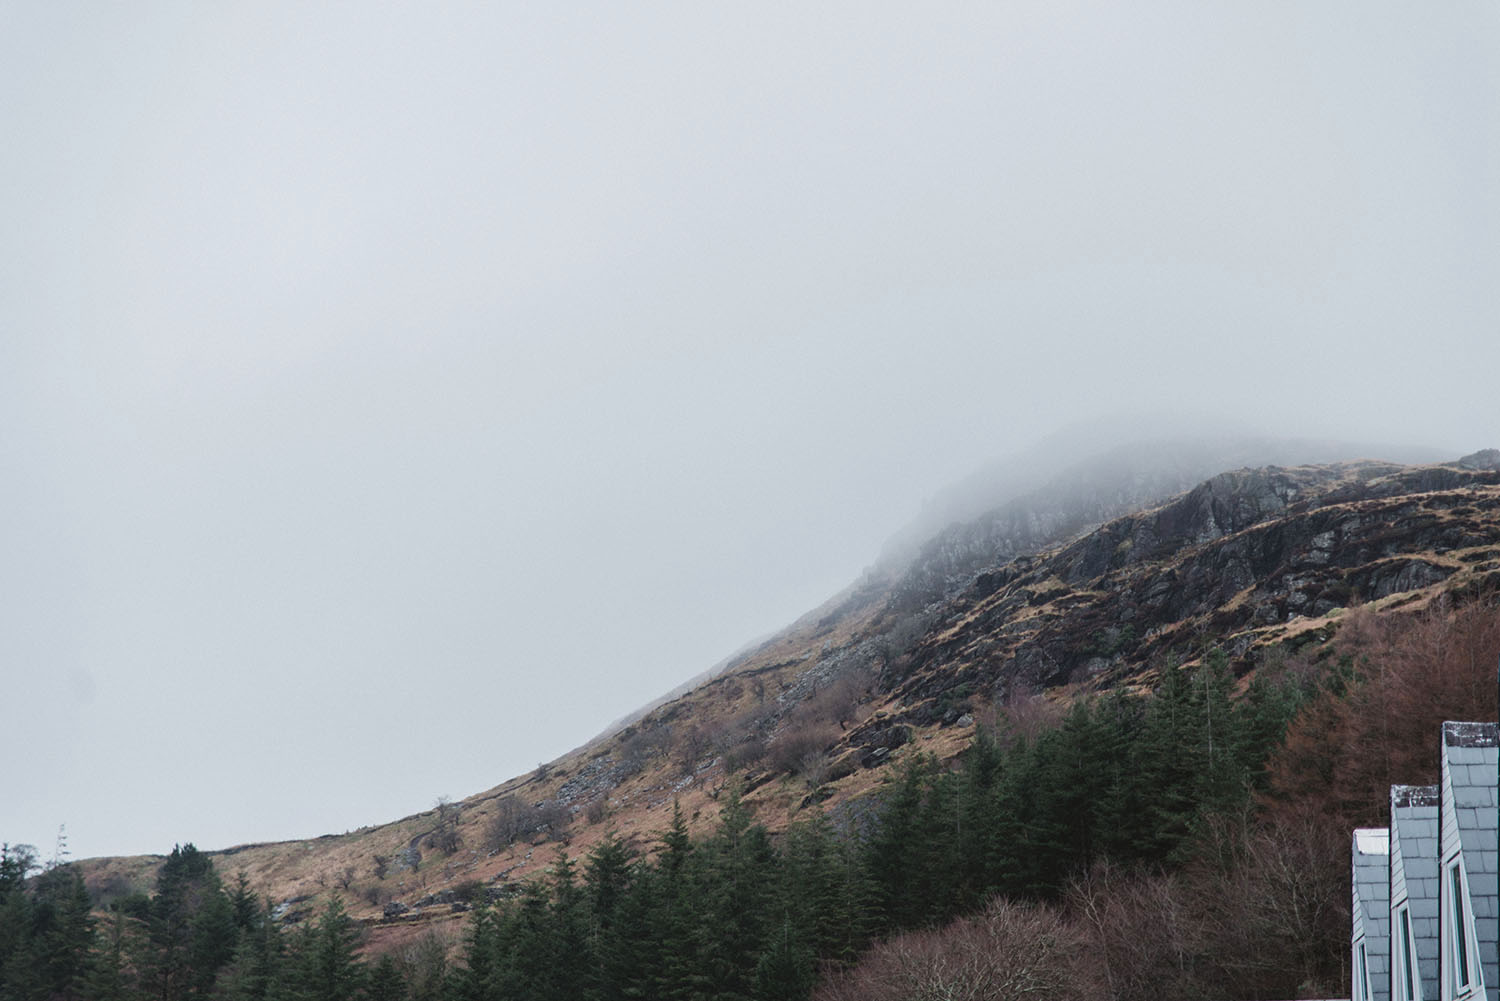 Misty mountains in Snowdonia National Park